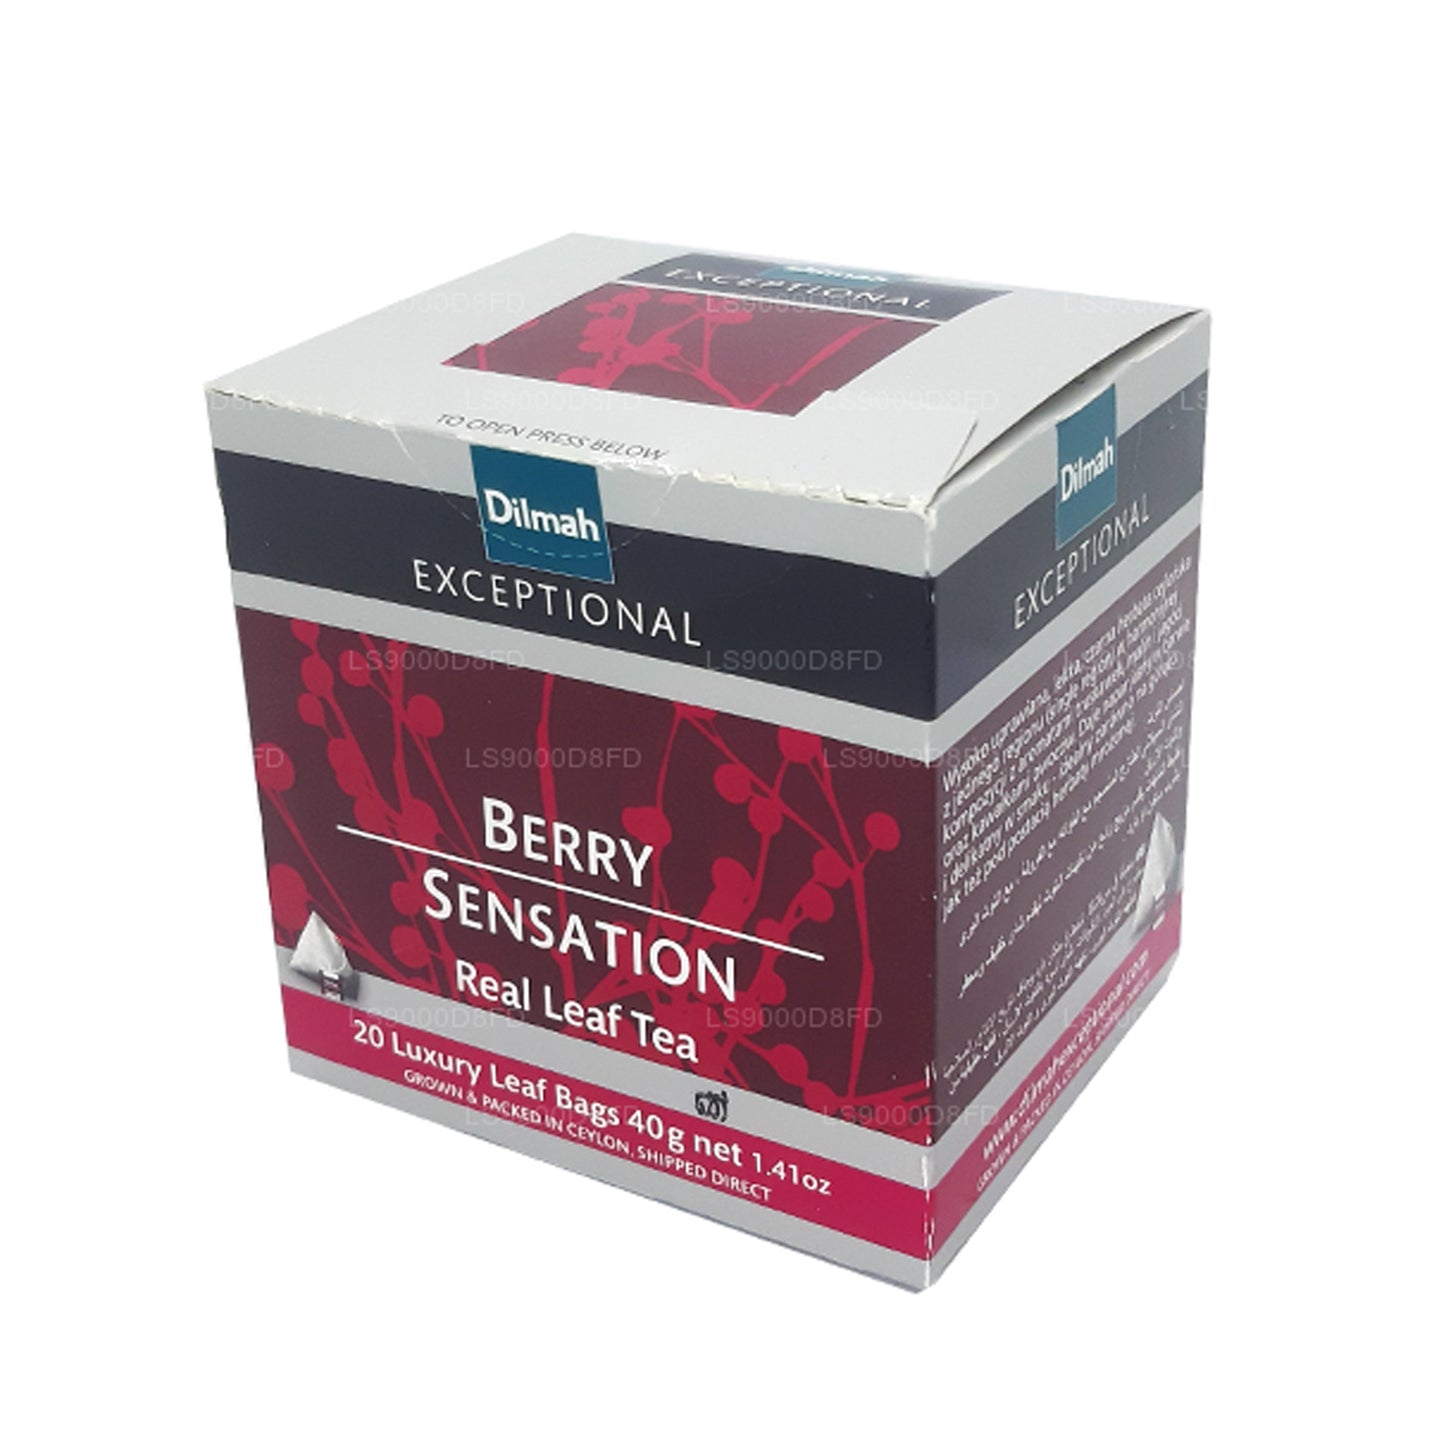 Dilmah Exceptional Berry Sensation Real Leaf-thee (40 g) 20 theezakjes